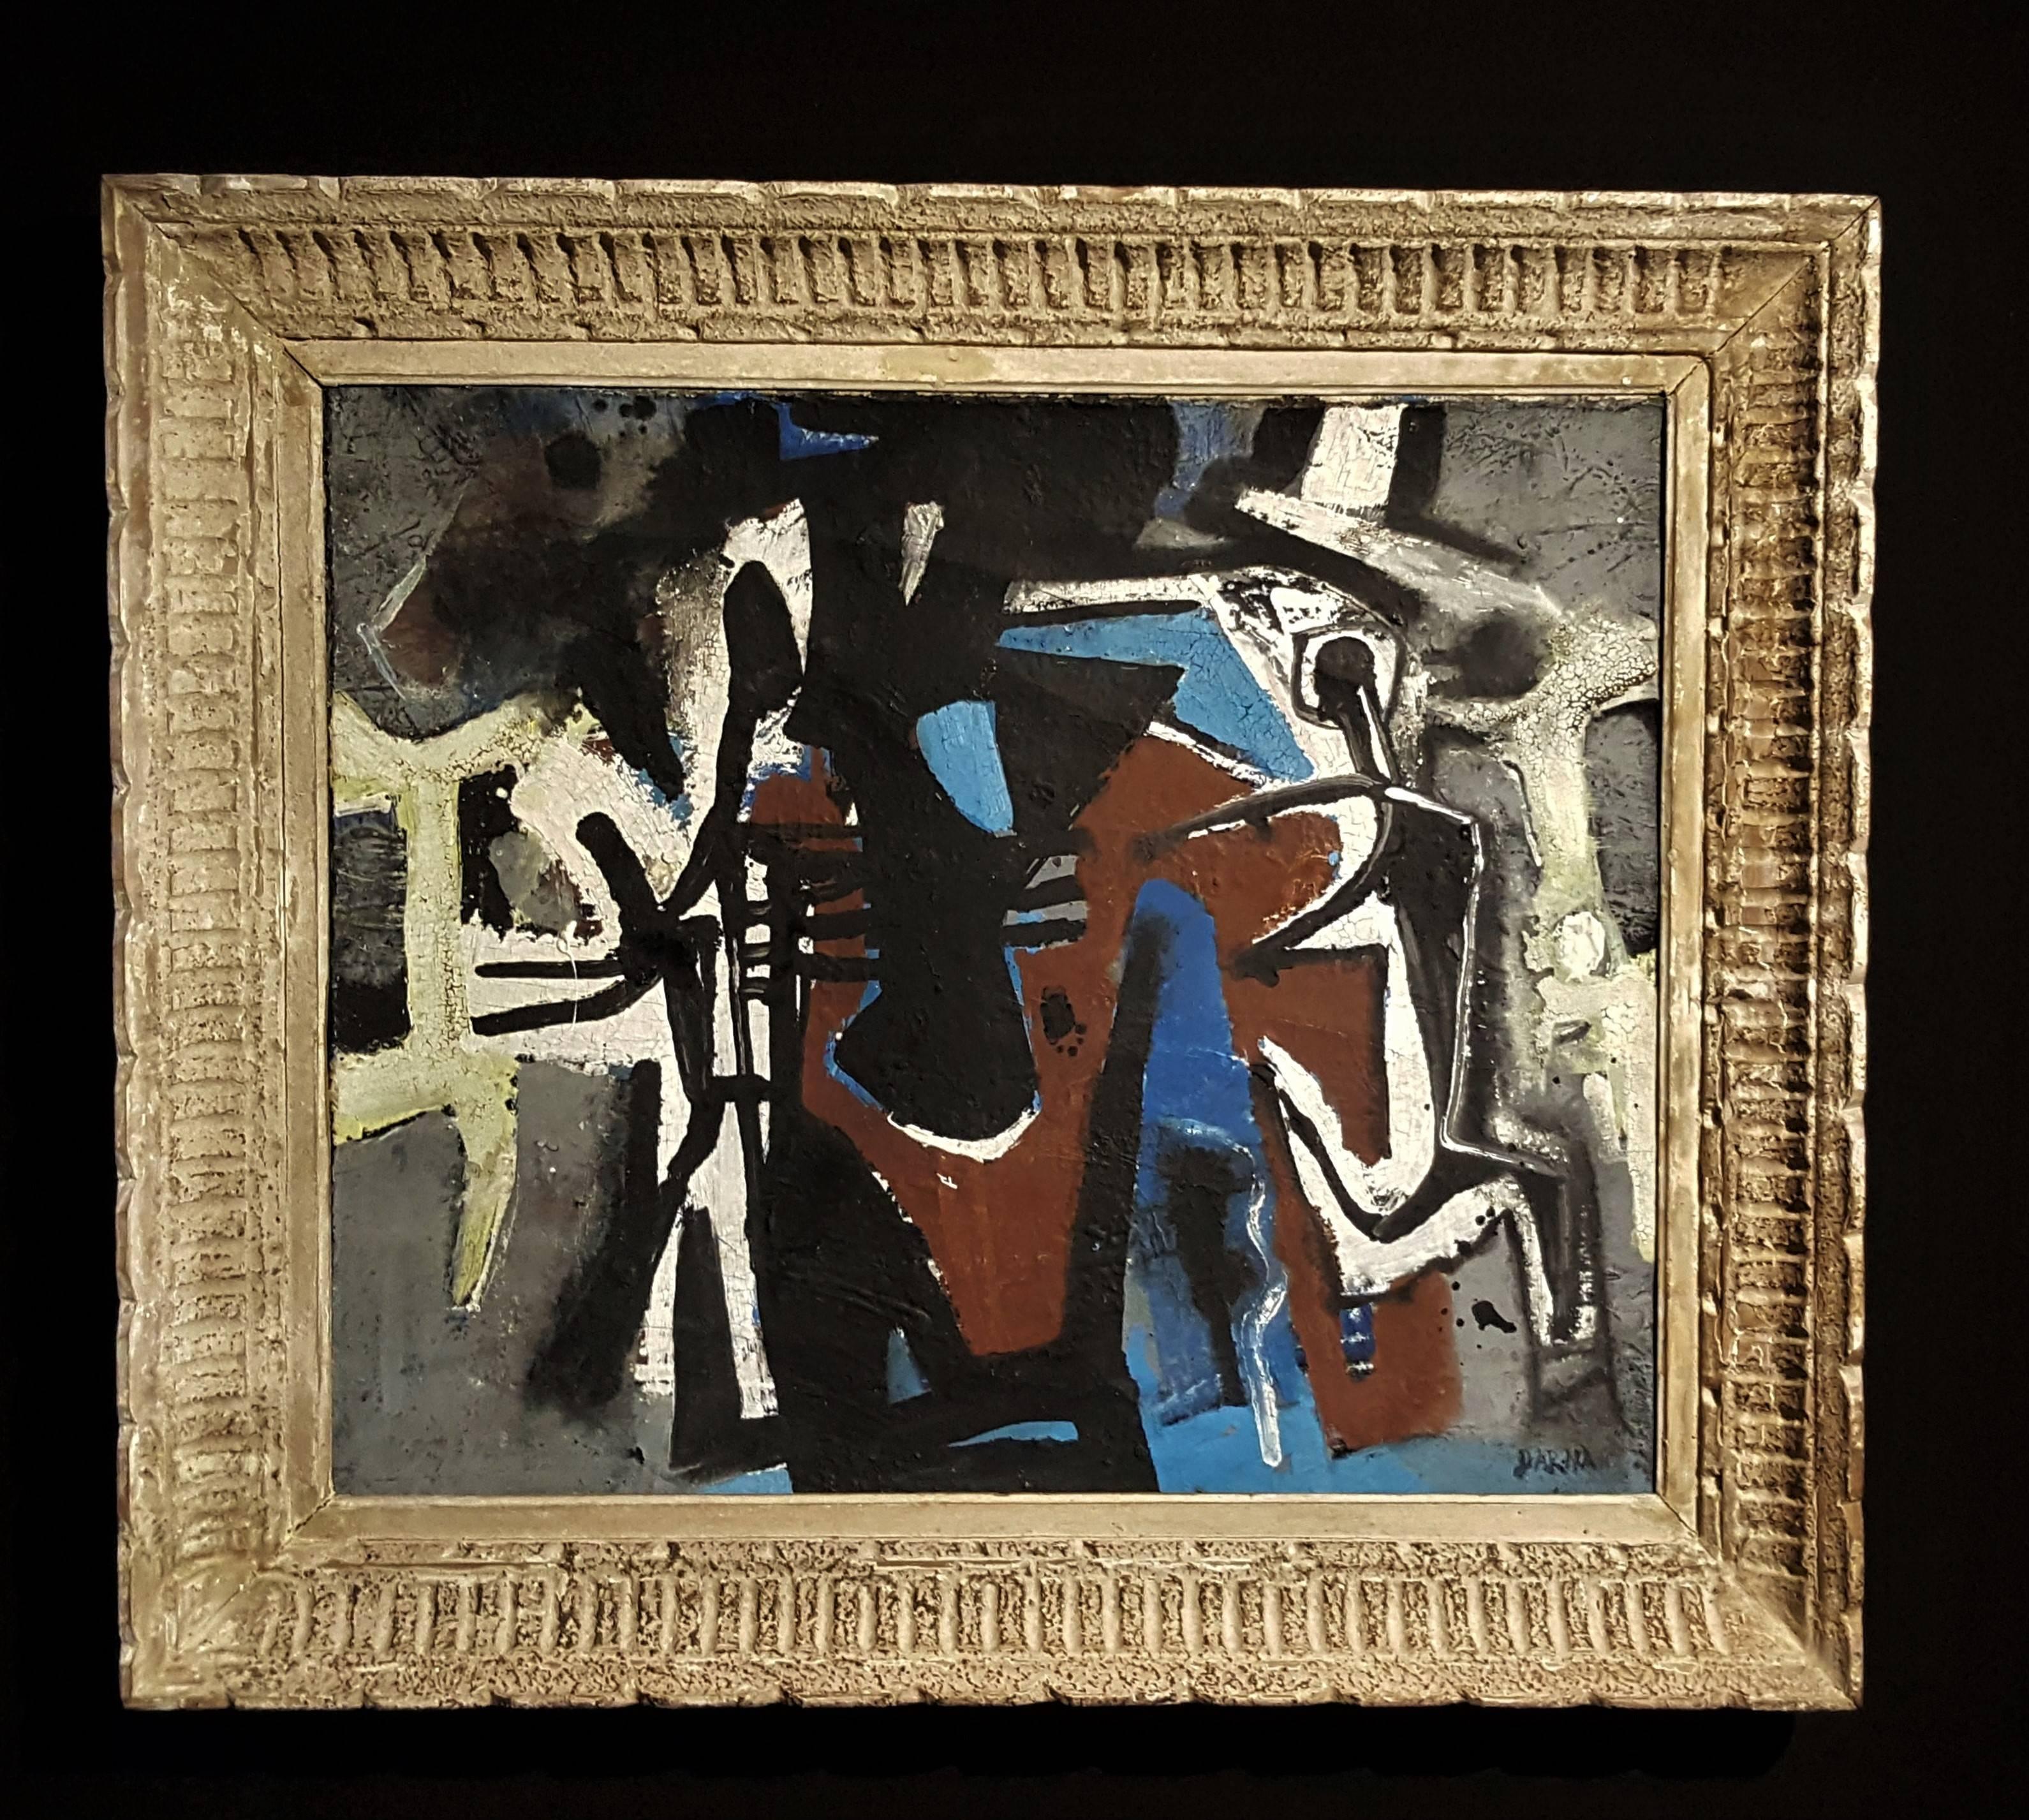 Oil on canvas.
Signed on the lower right.
Provenance: workshop sale
Dimension without frame: 46.5 x 55 cm
Dimension with frame: 60 x 69 cm

From cubism to abstraction with Jan Darna (1901-1974)

These oils and watercolors, made mostly circa 1950s,